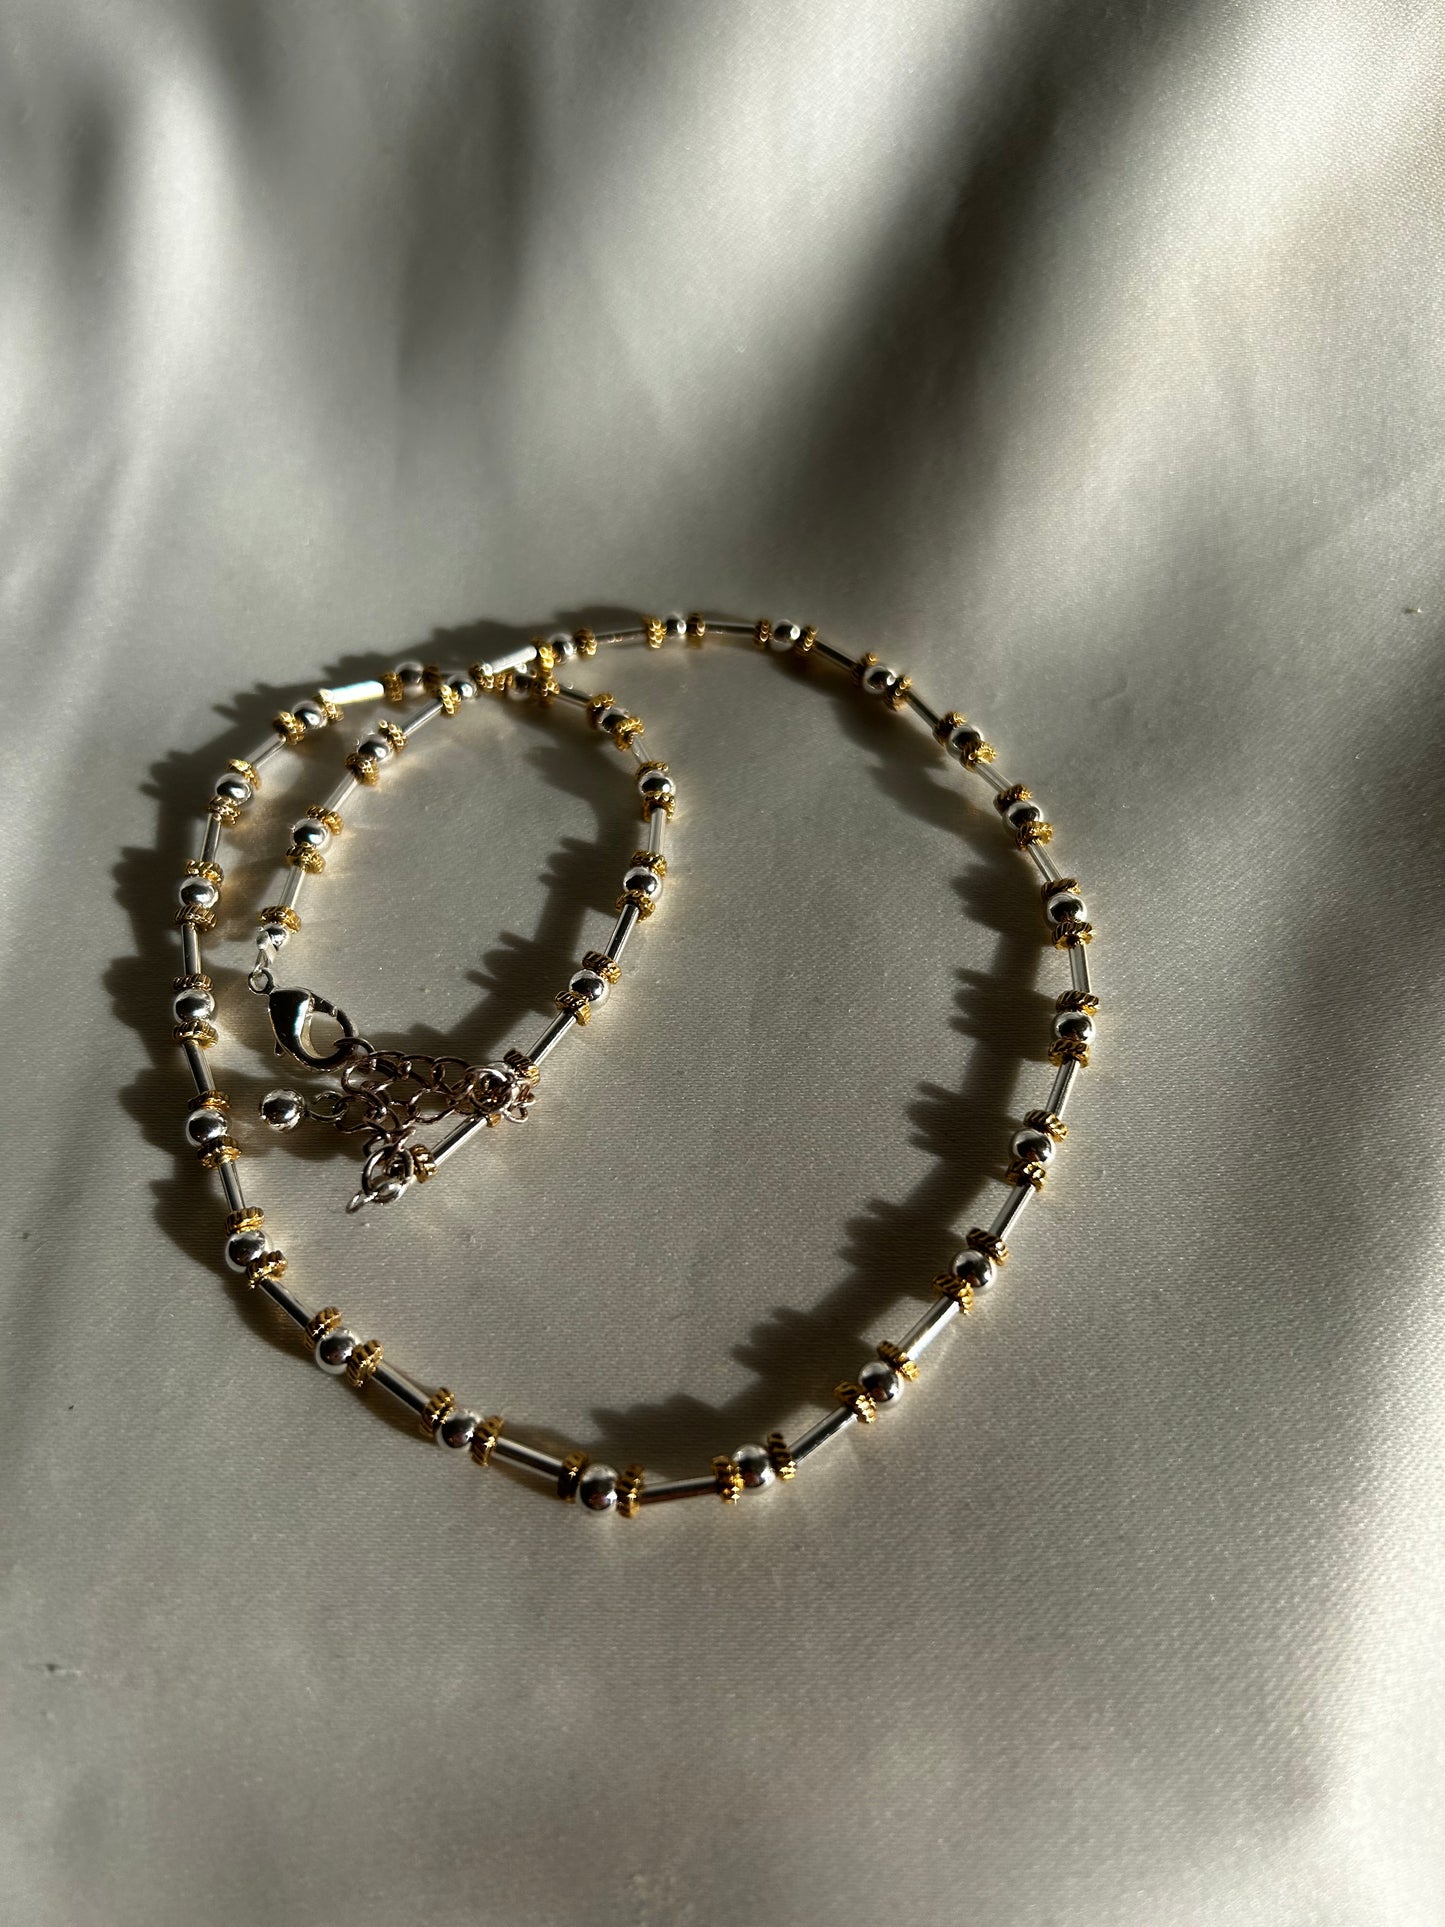 Vintage Bead Chain Necklace